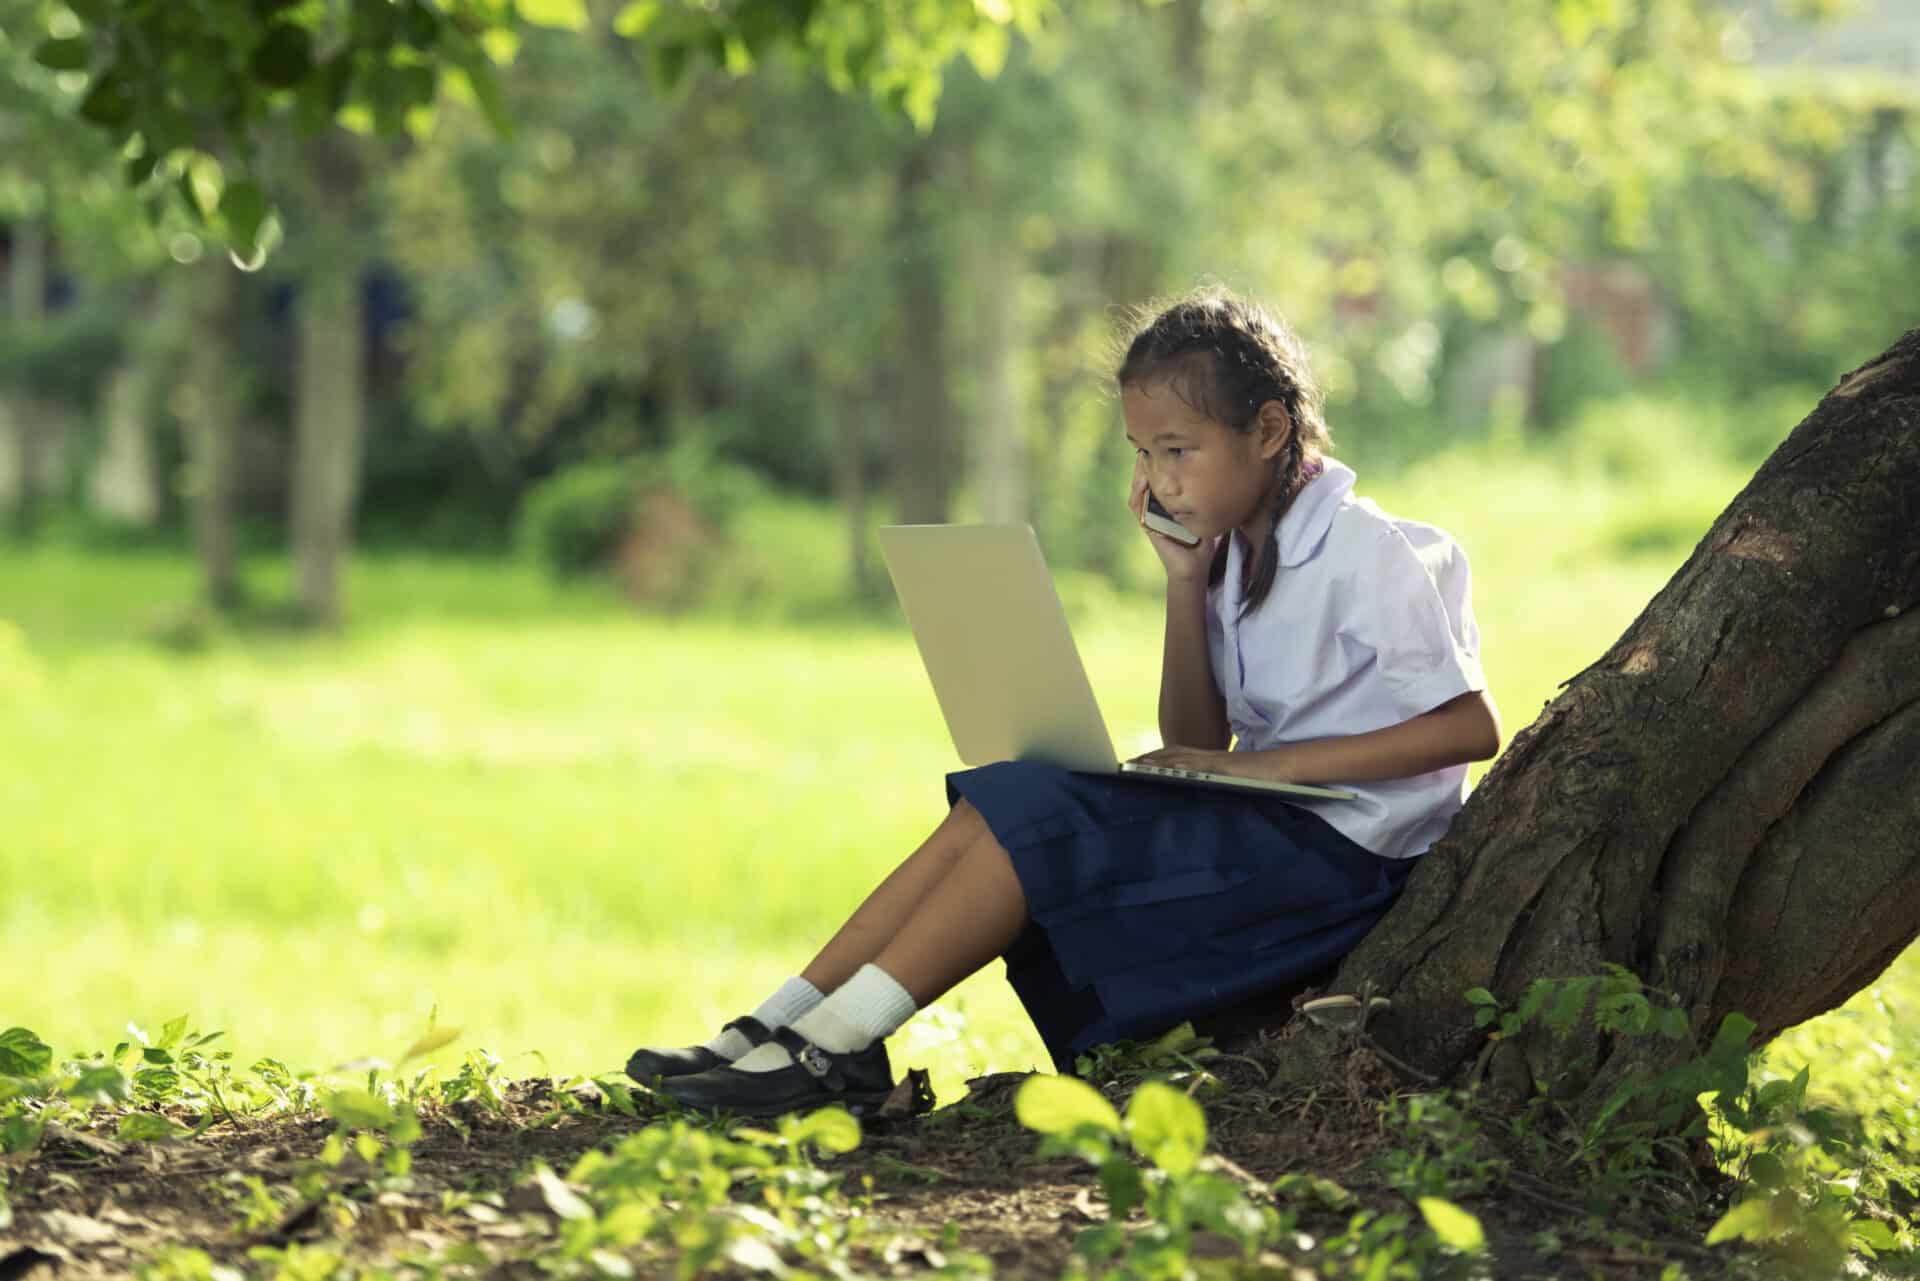 Girl learner with a laptop